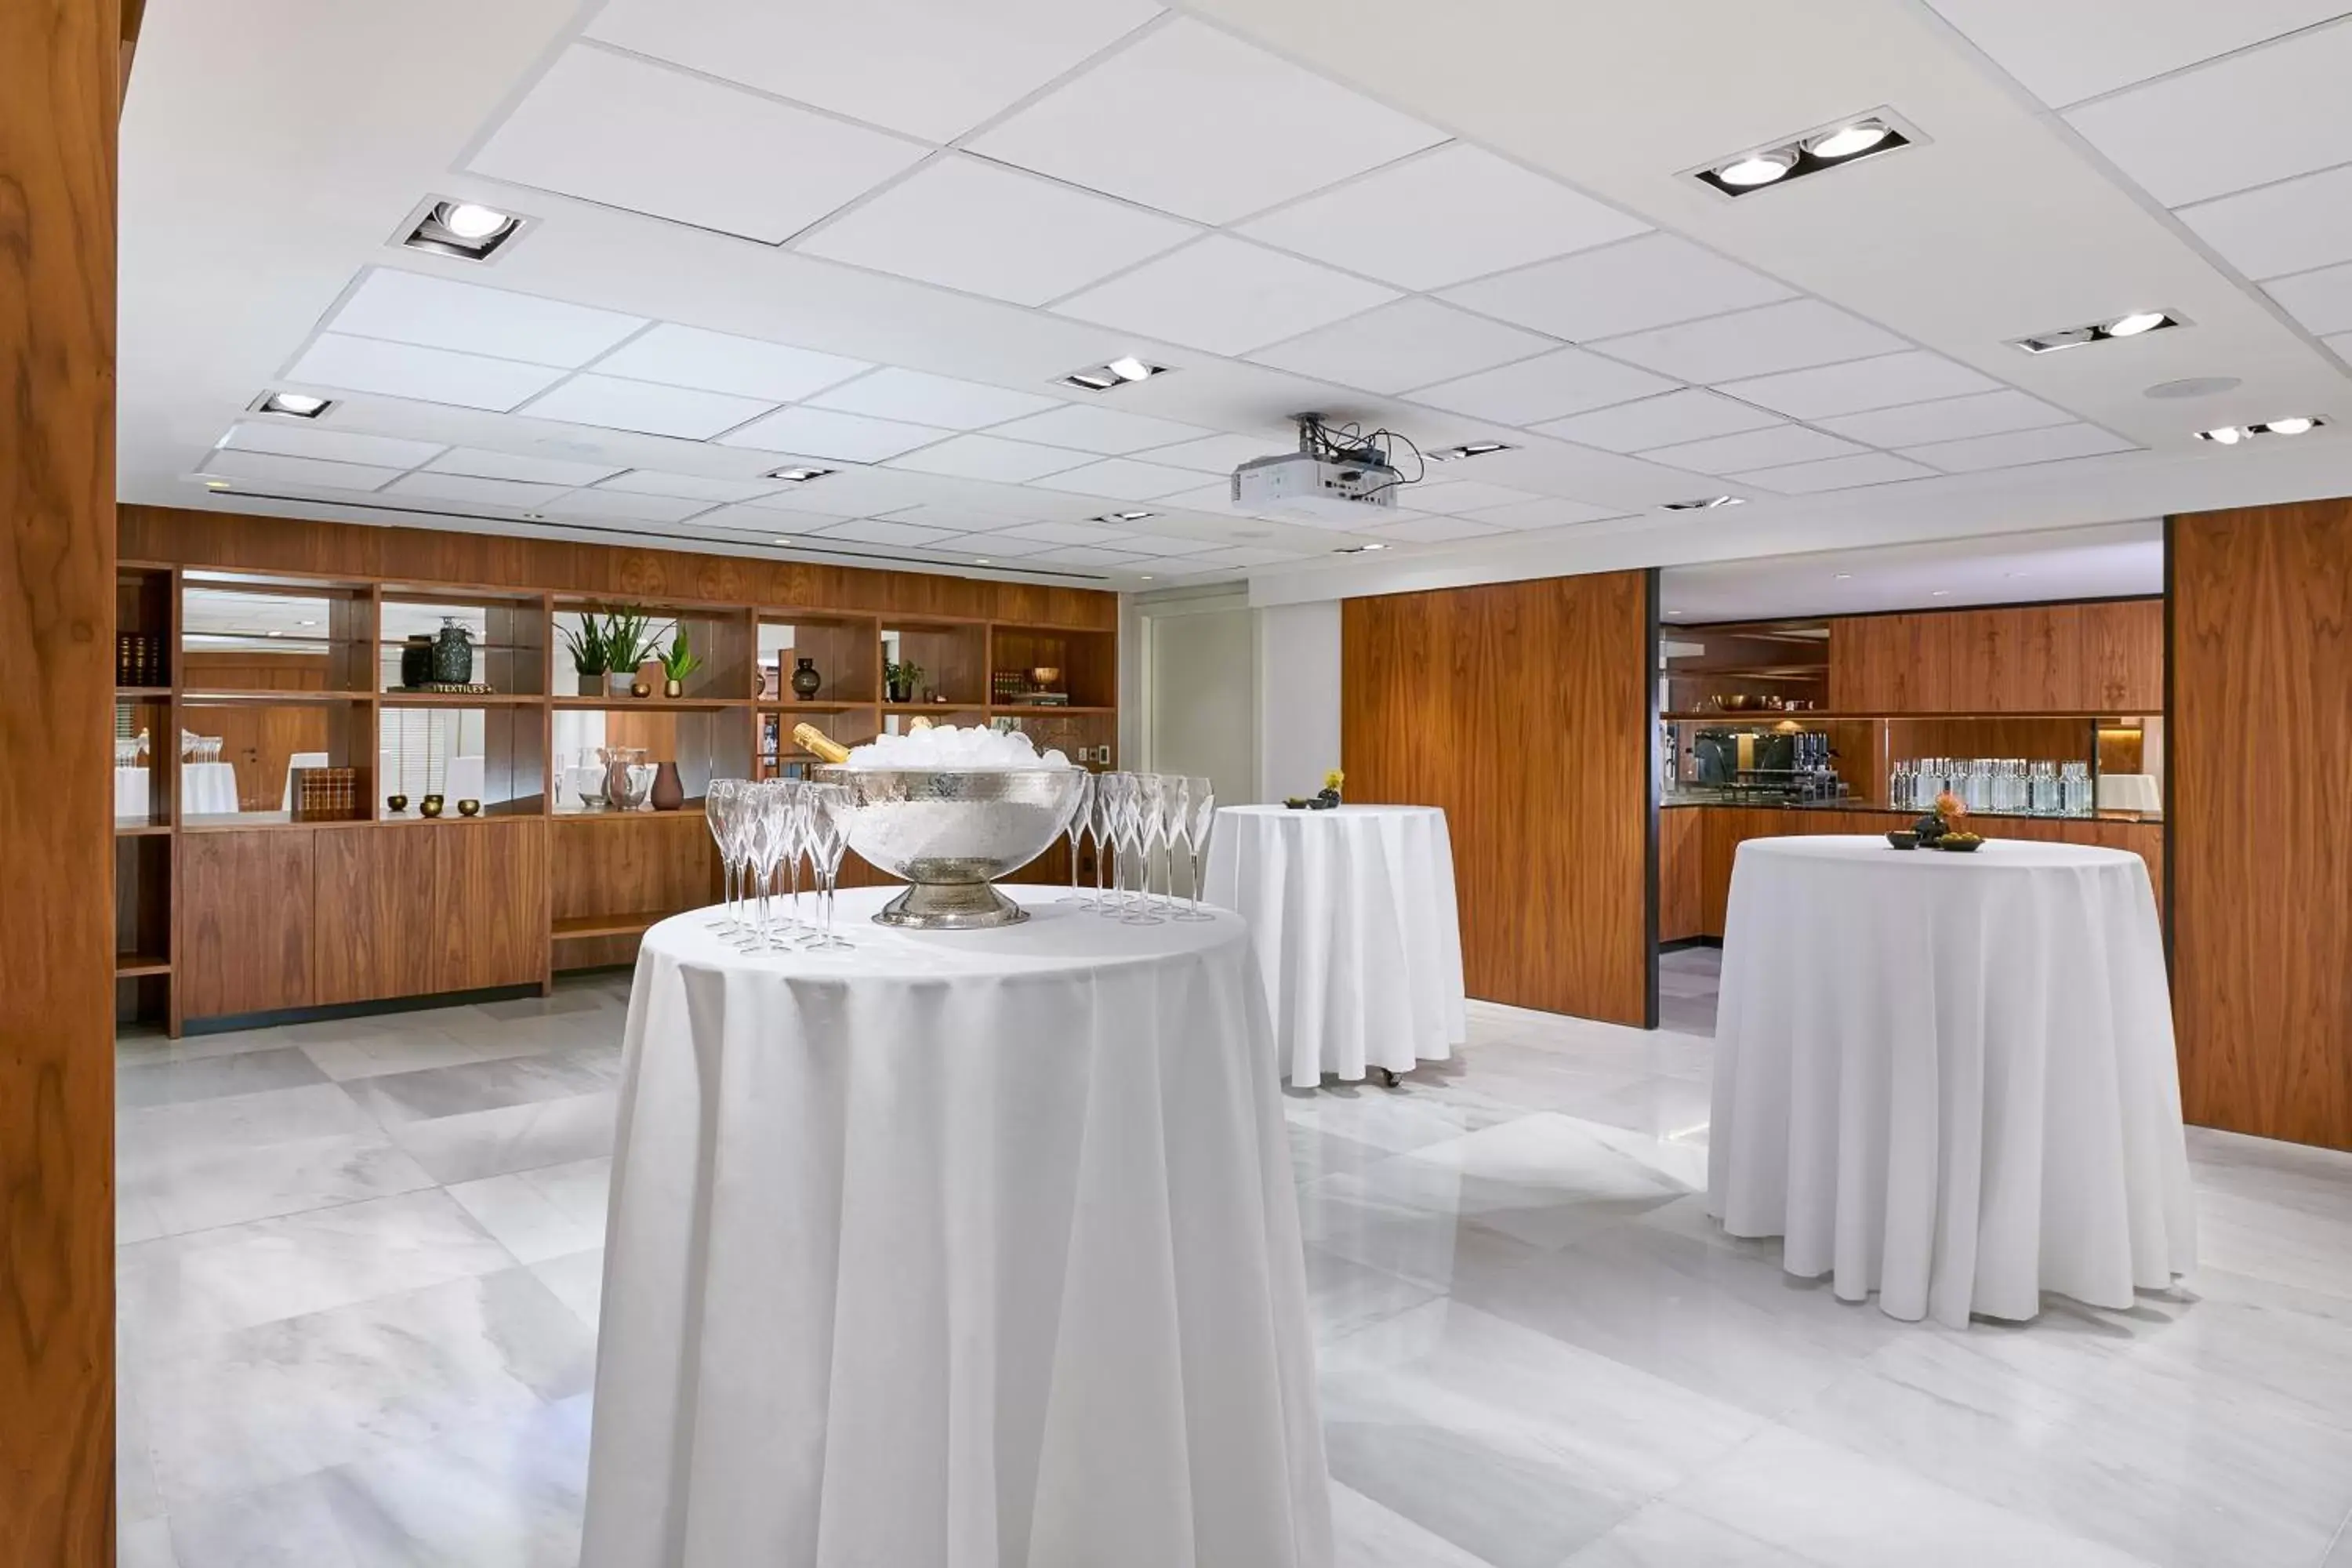 Banquet/Function facilities, Banquet Facilities in Melia White House Hotel